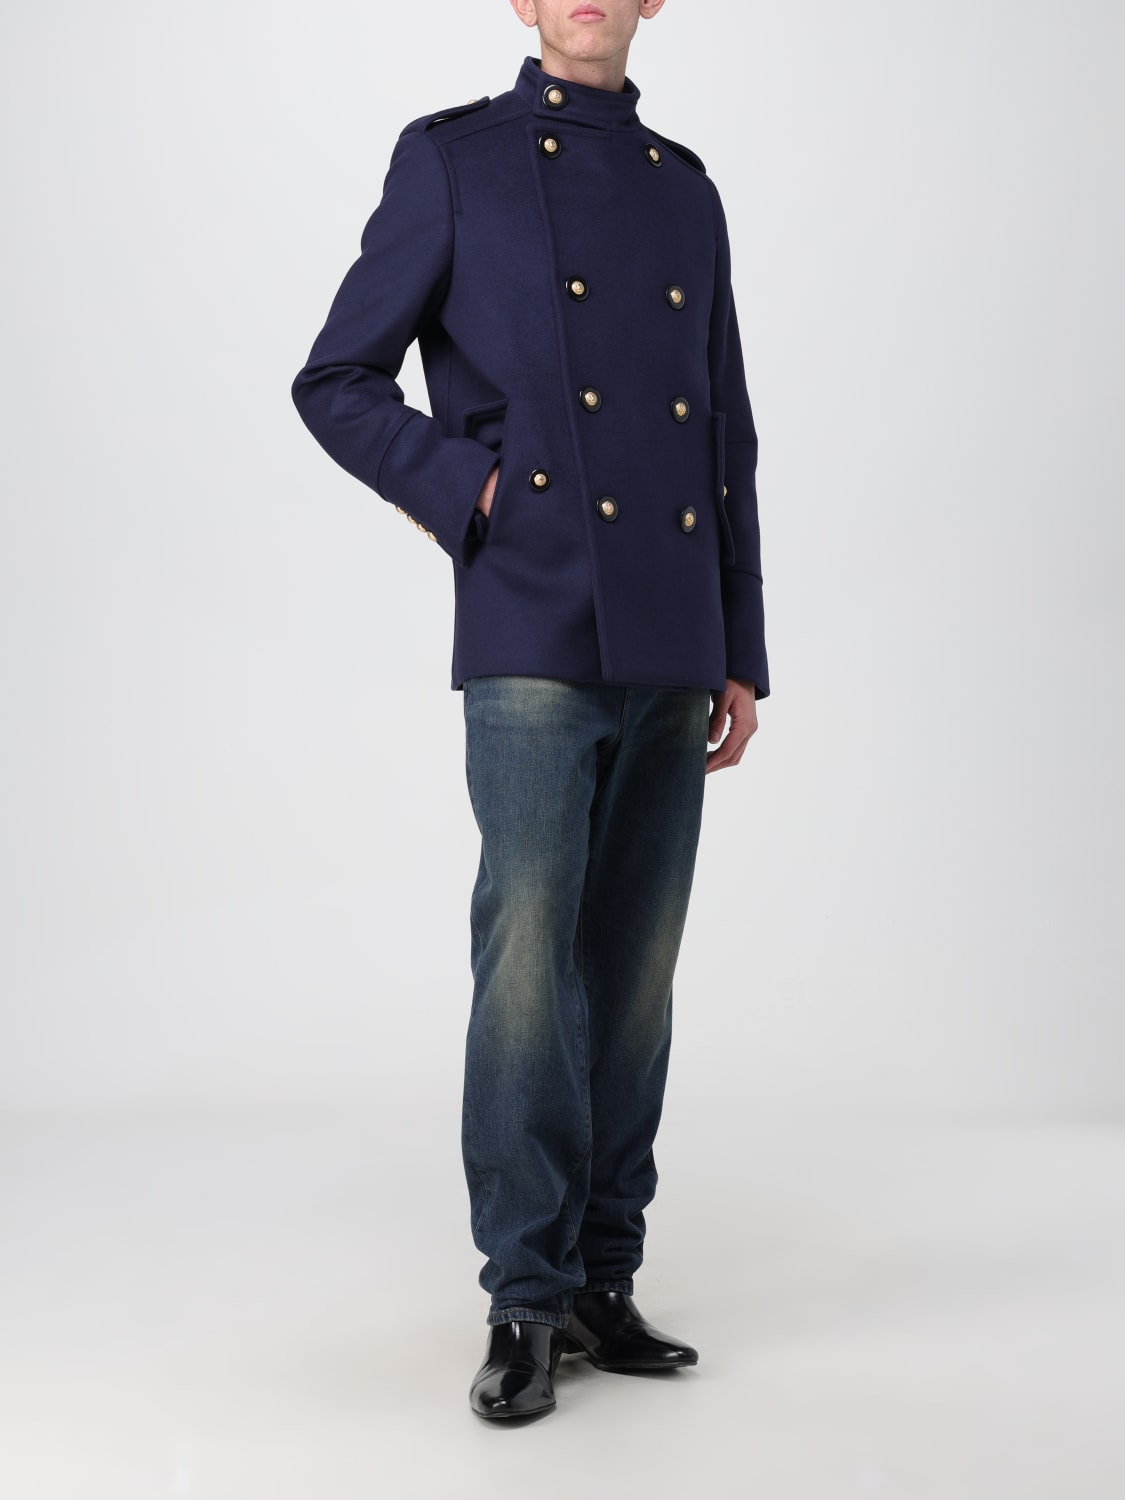 Men's double-breasted coat in blue wool with gold buttons